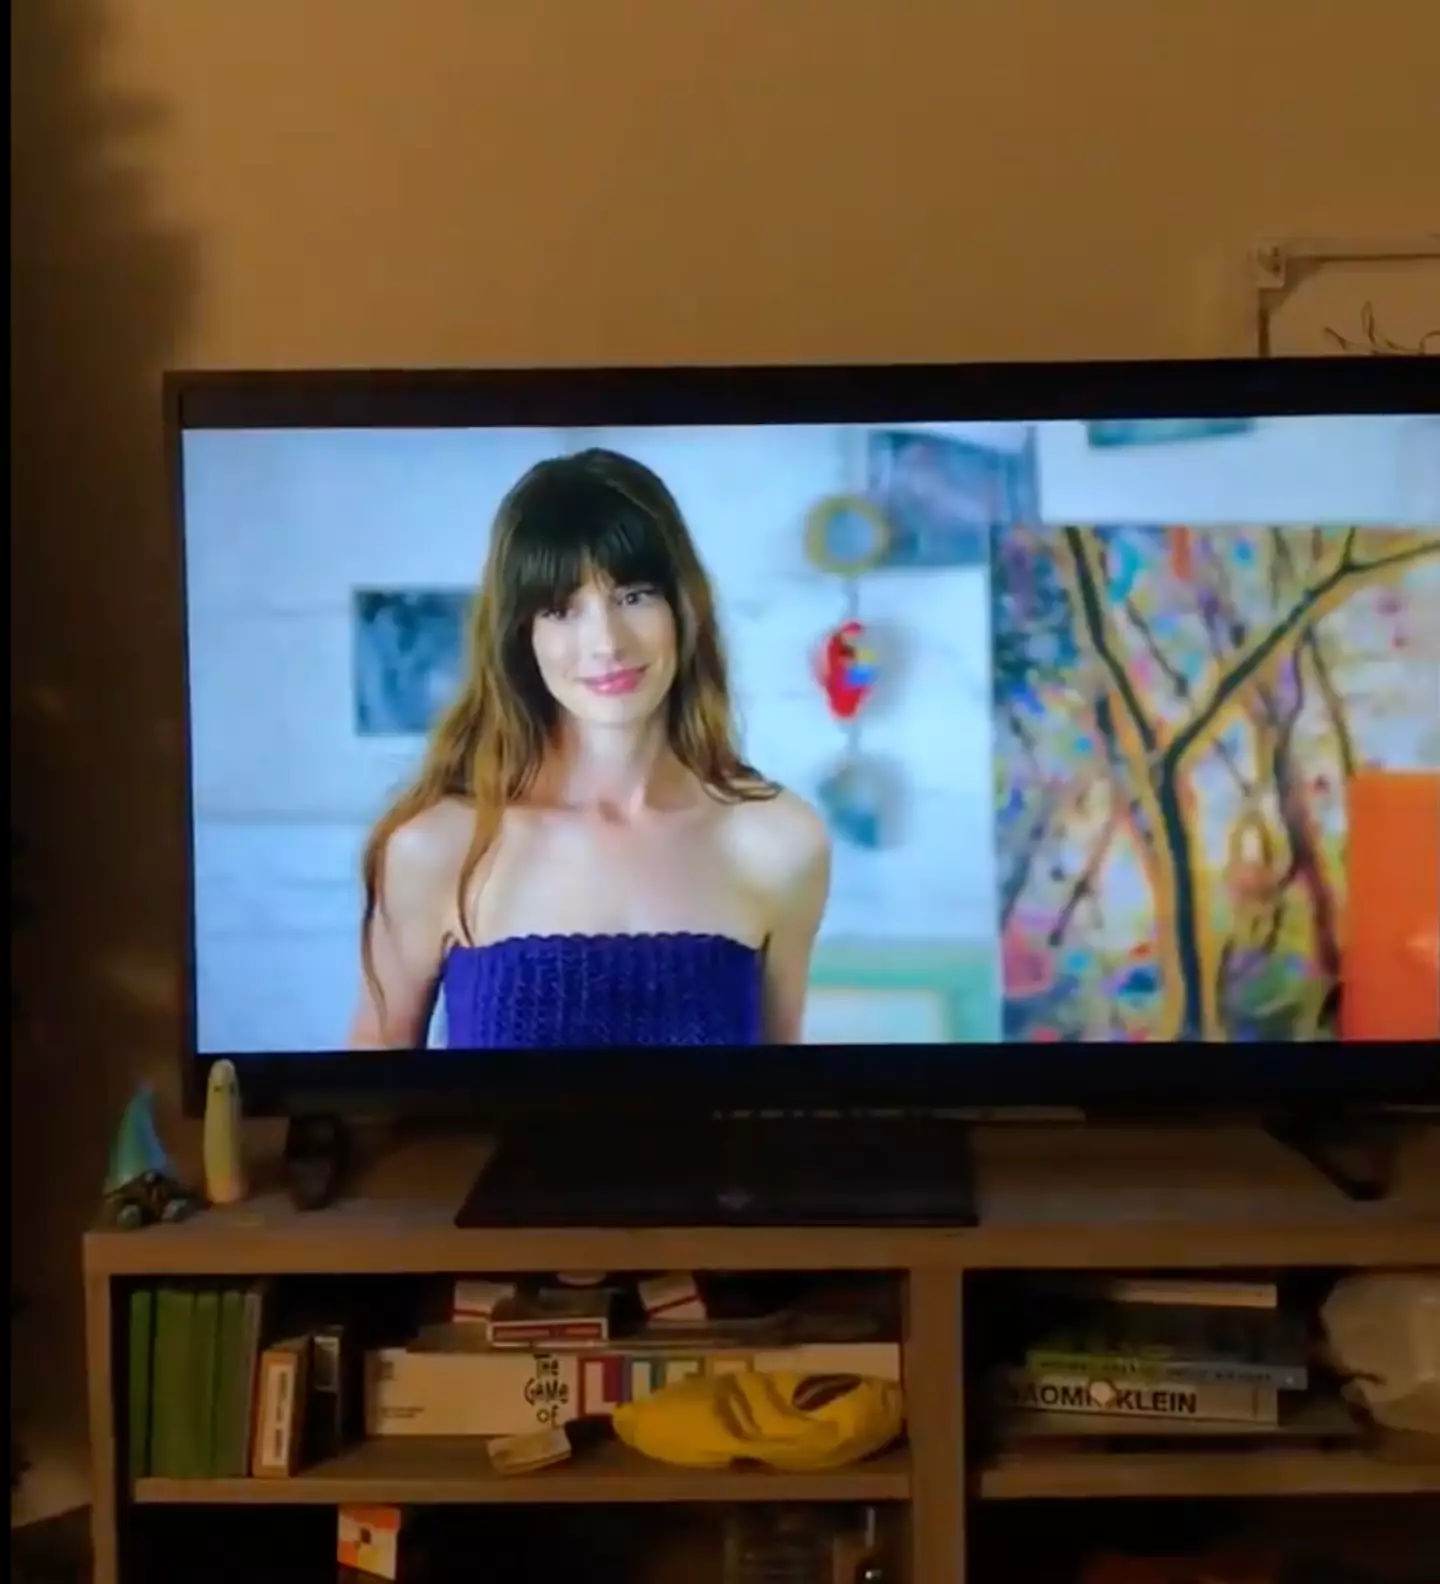 Anne Hathaway’s latest film, The Idea of You, has left plenty of viewers distracted by an easy to spot error. (Pizzadrienne/X/ AmazonMGMstudios)